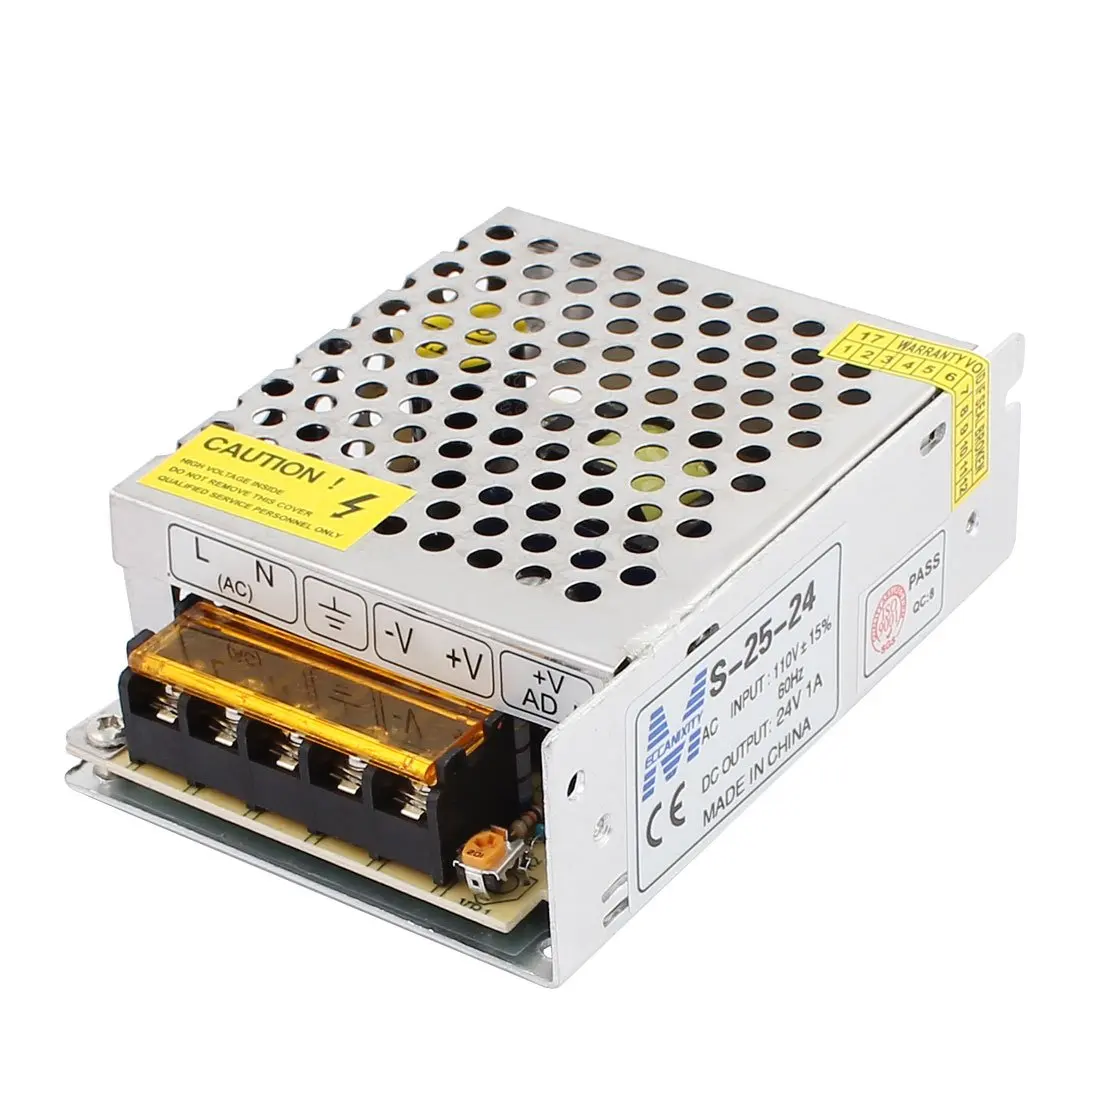 Led Switching Power Supply. DC output на блоке питания. Power Supply for led. Что такое output на блоке питания.